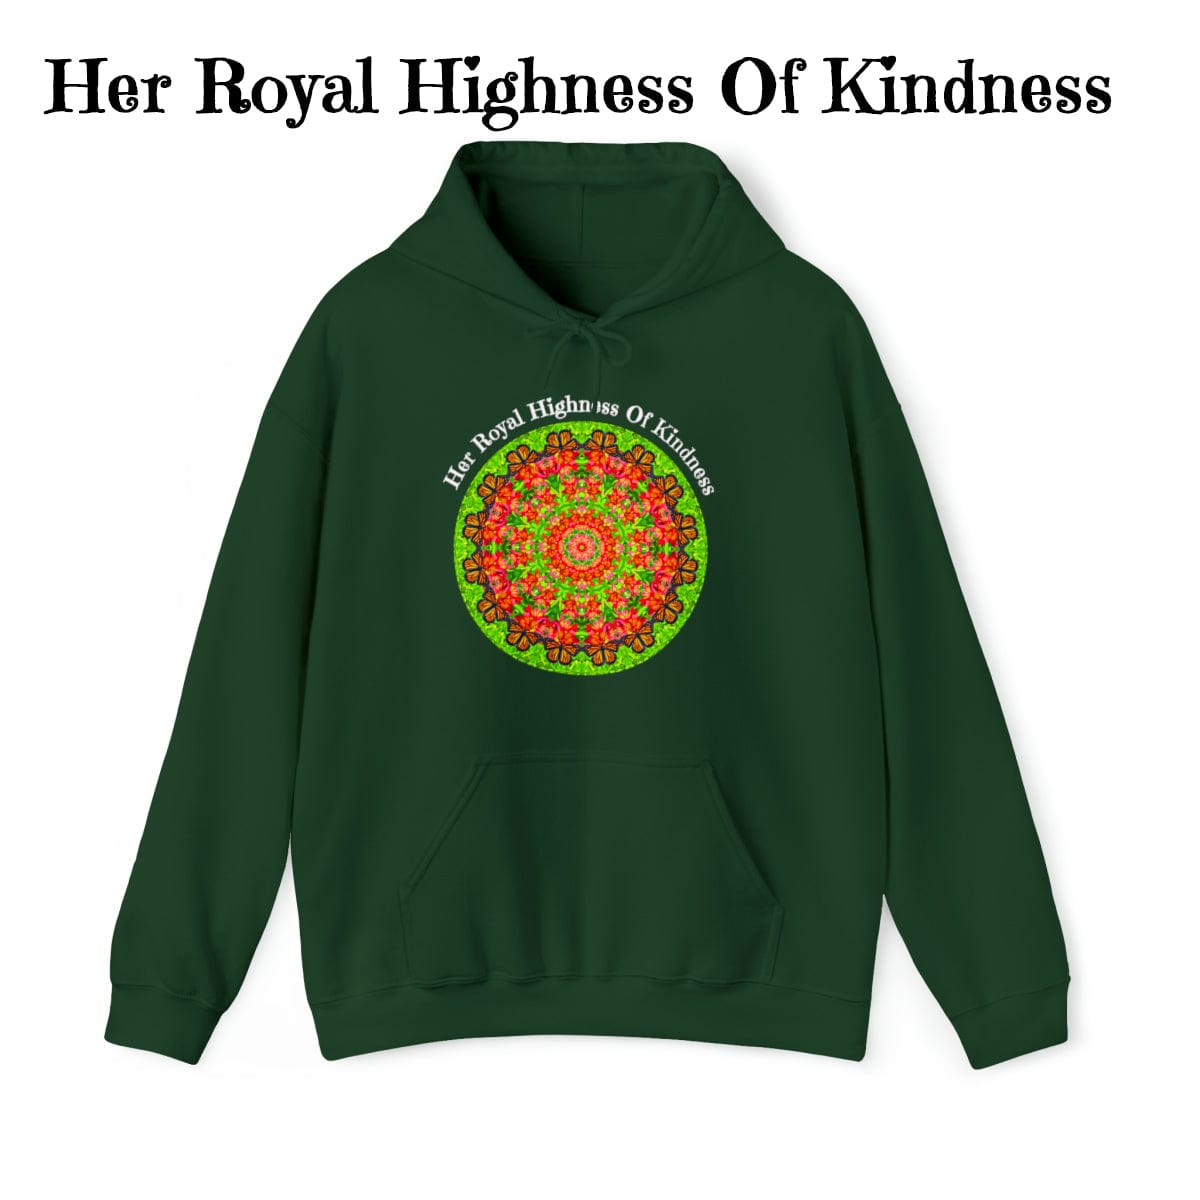 Monarch Butterfly Love Sweatshirt Pullover Hoodie – Her Royal Highness Of Kindness forest green